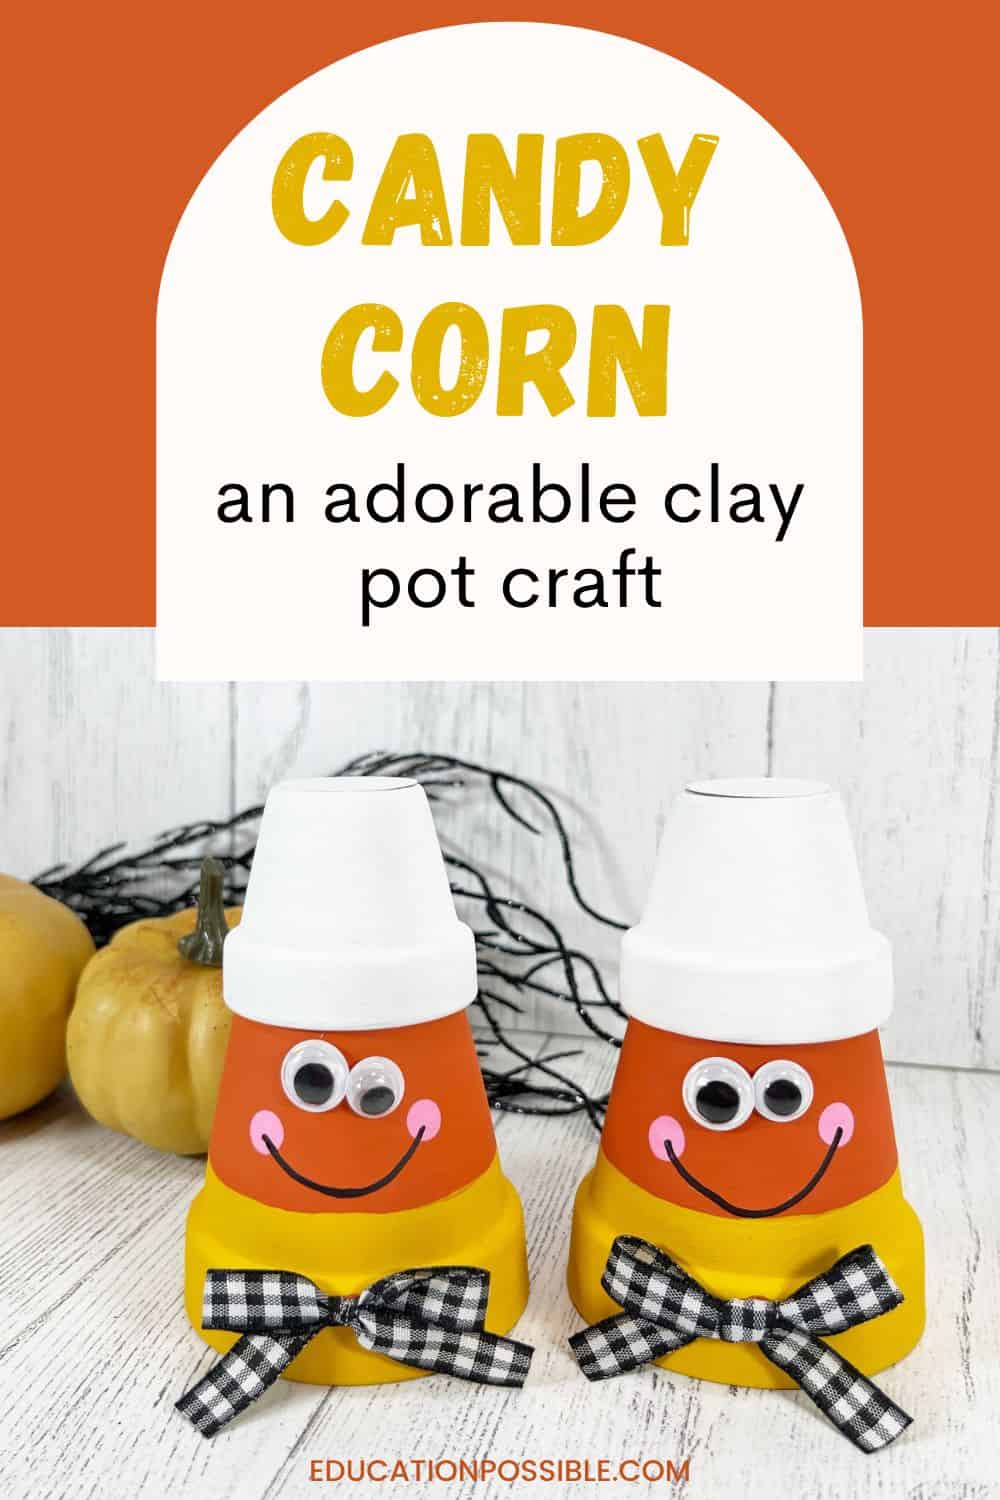 Craft that used terracotta pots and painted them like candy corn. Added a cute face with googly eyes.